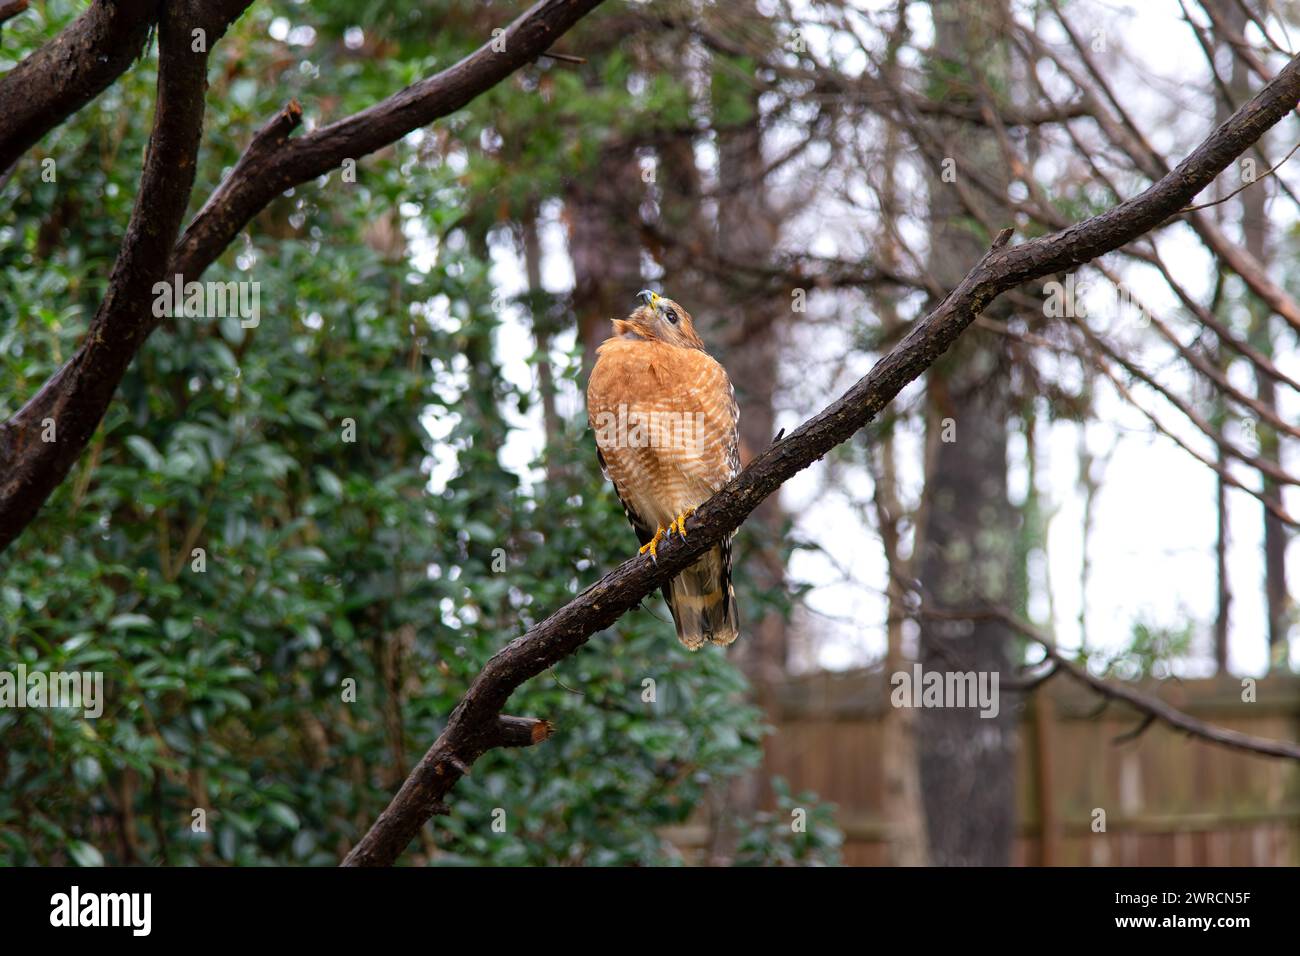 An adult, Red-shouldered Hawk (Buteo lineatus) looking straight up while sitting on a tree branch in a suburban backyard. Stock Photo